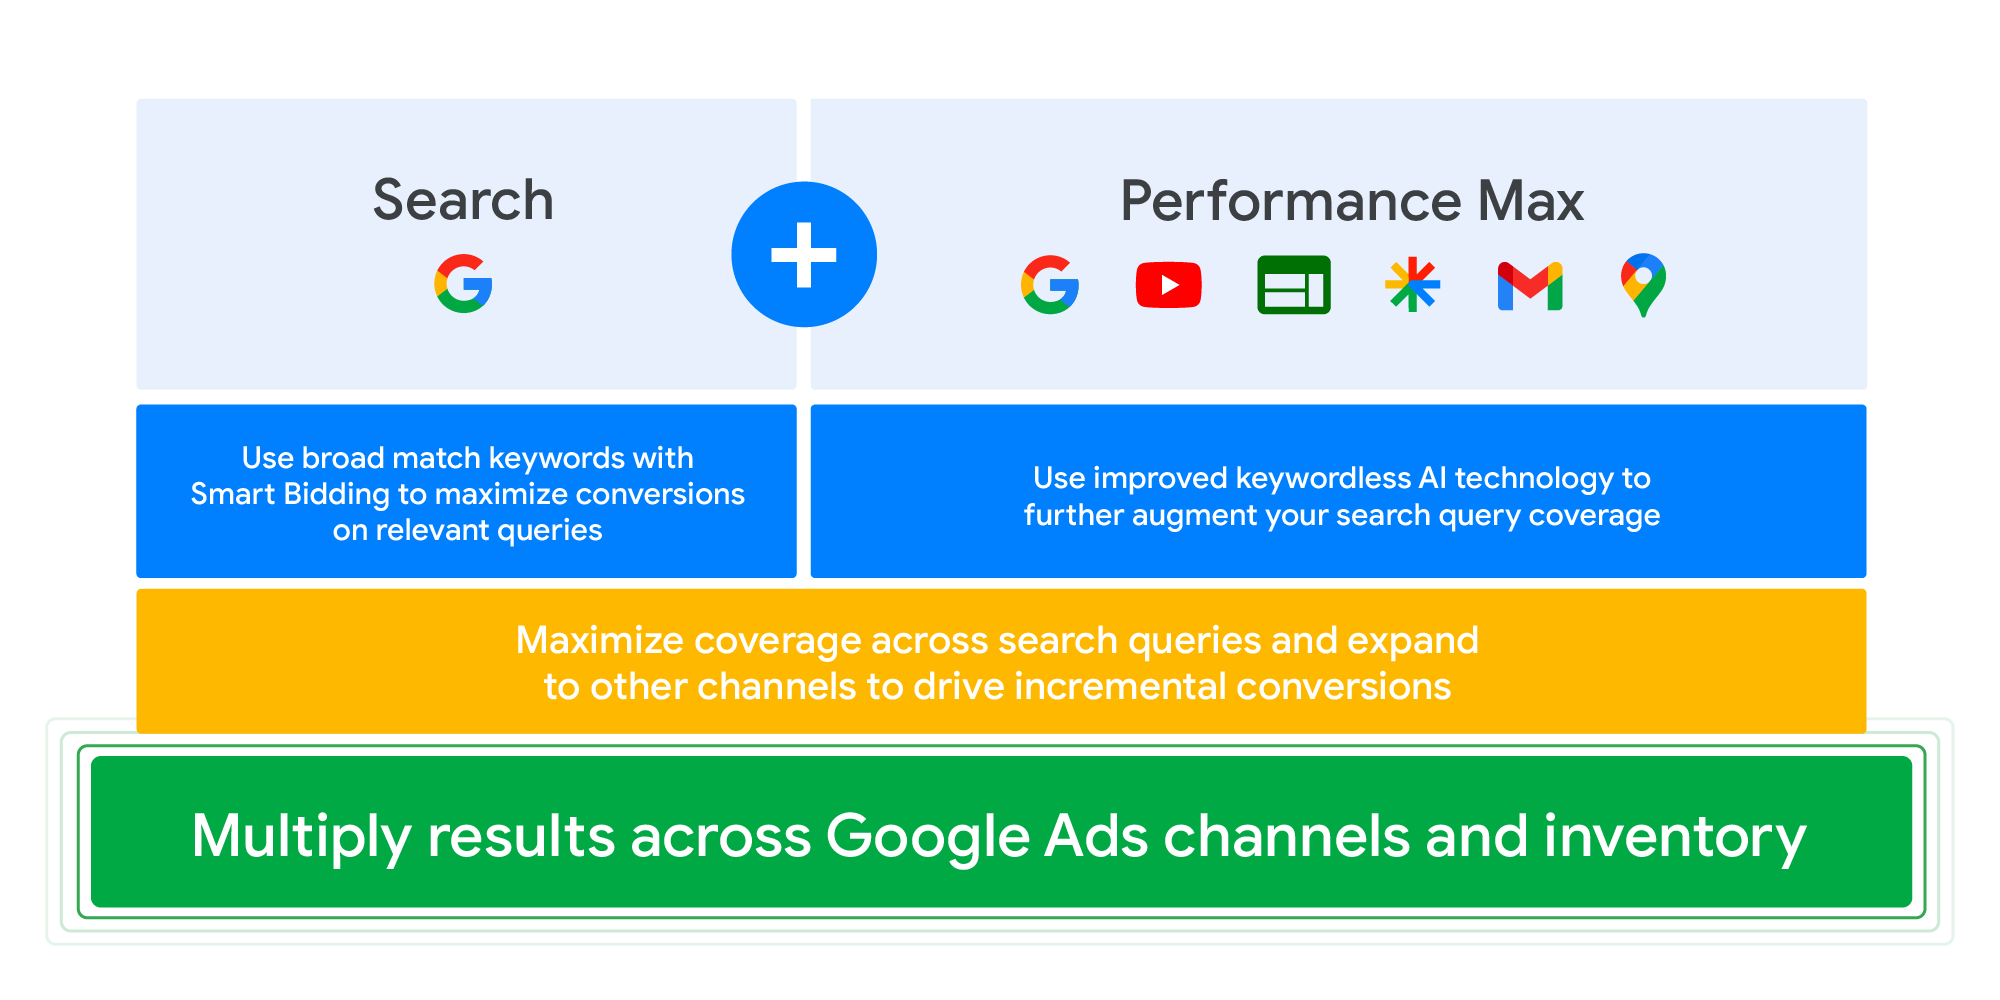 Table with text: Search + Performance Max multiplies results and ROI across Google Ads